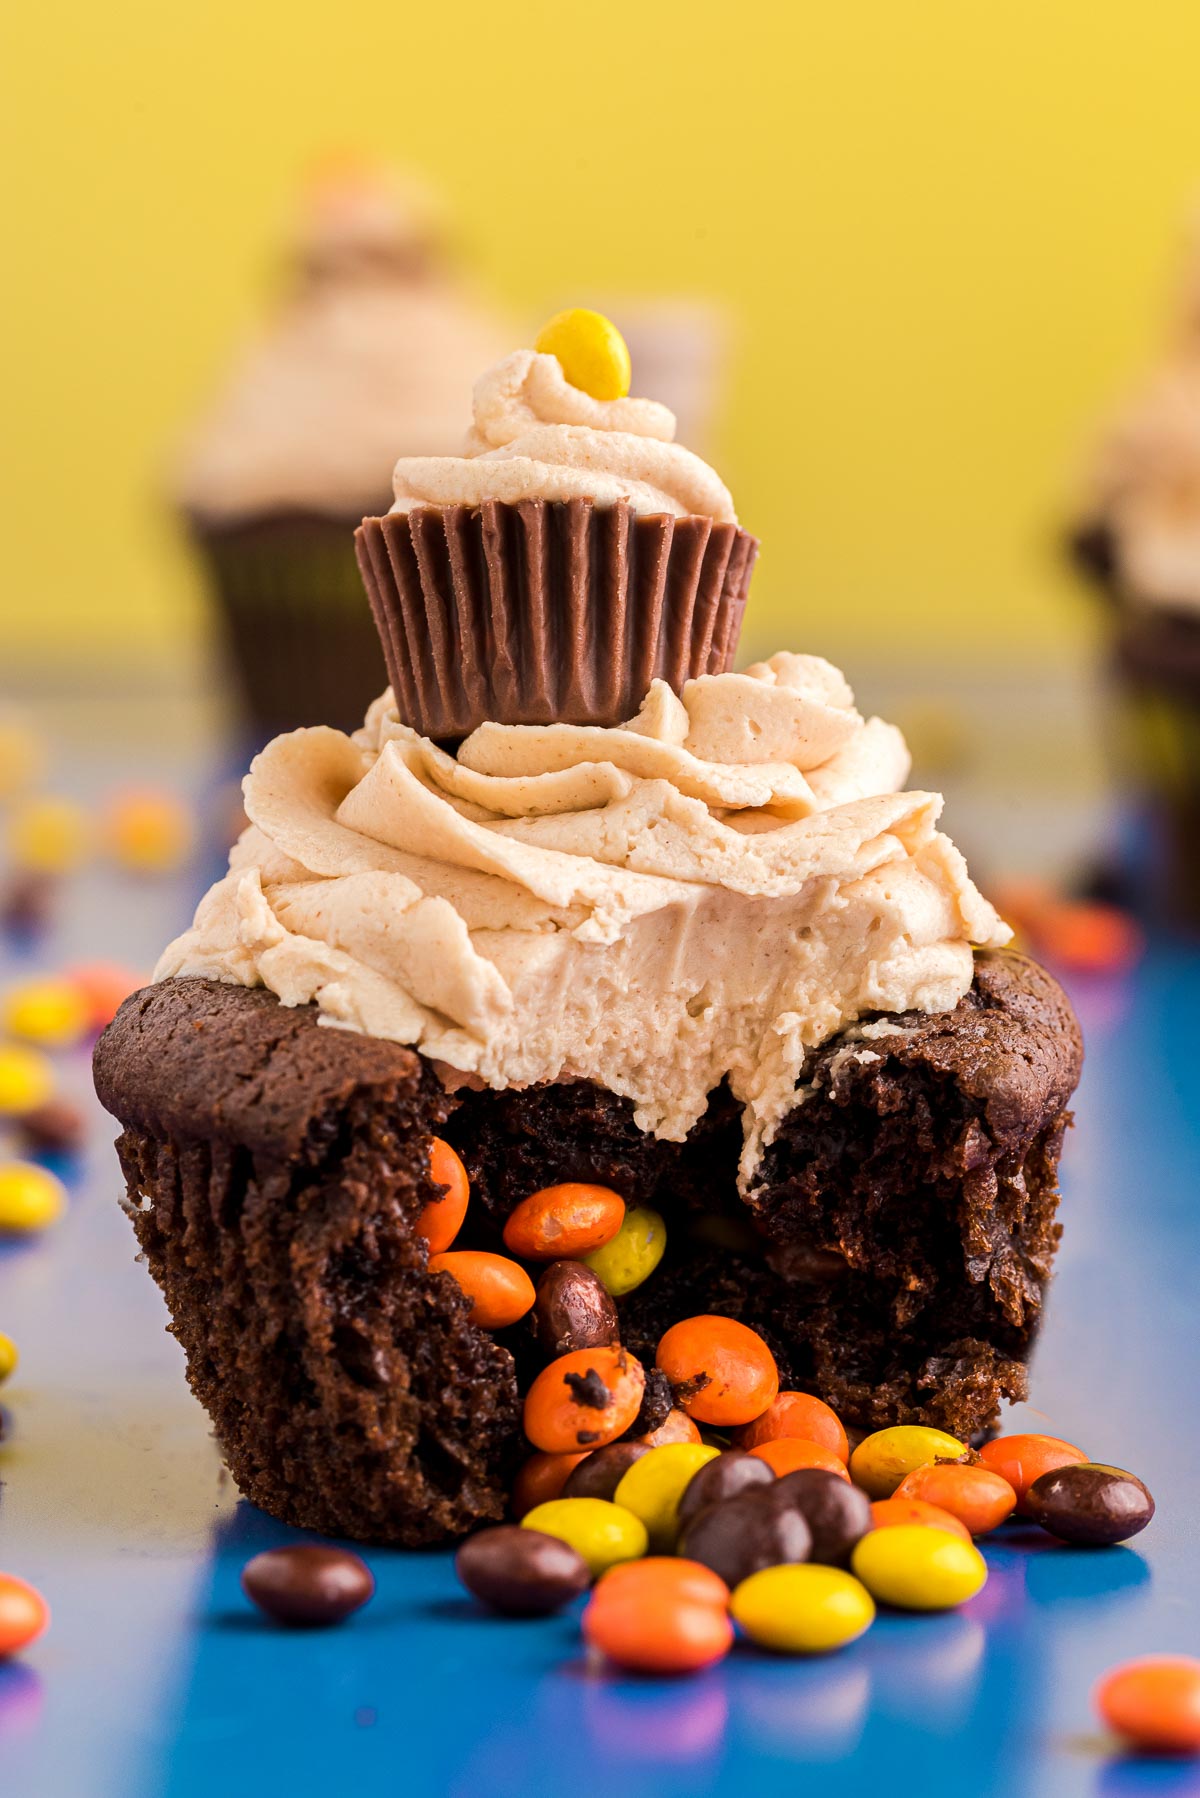 Close up photo of a peanut butter chocolate cupcake with mini Reese's pieces in the center falling out onto a blue surface.